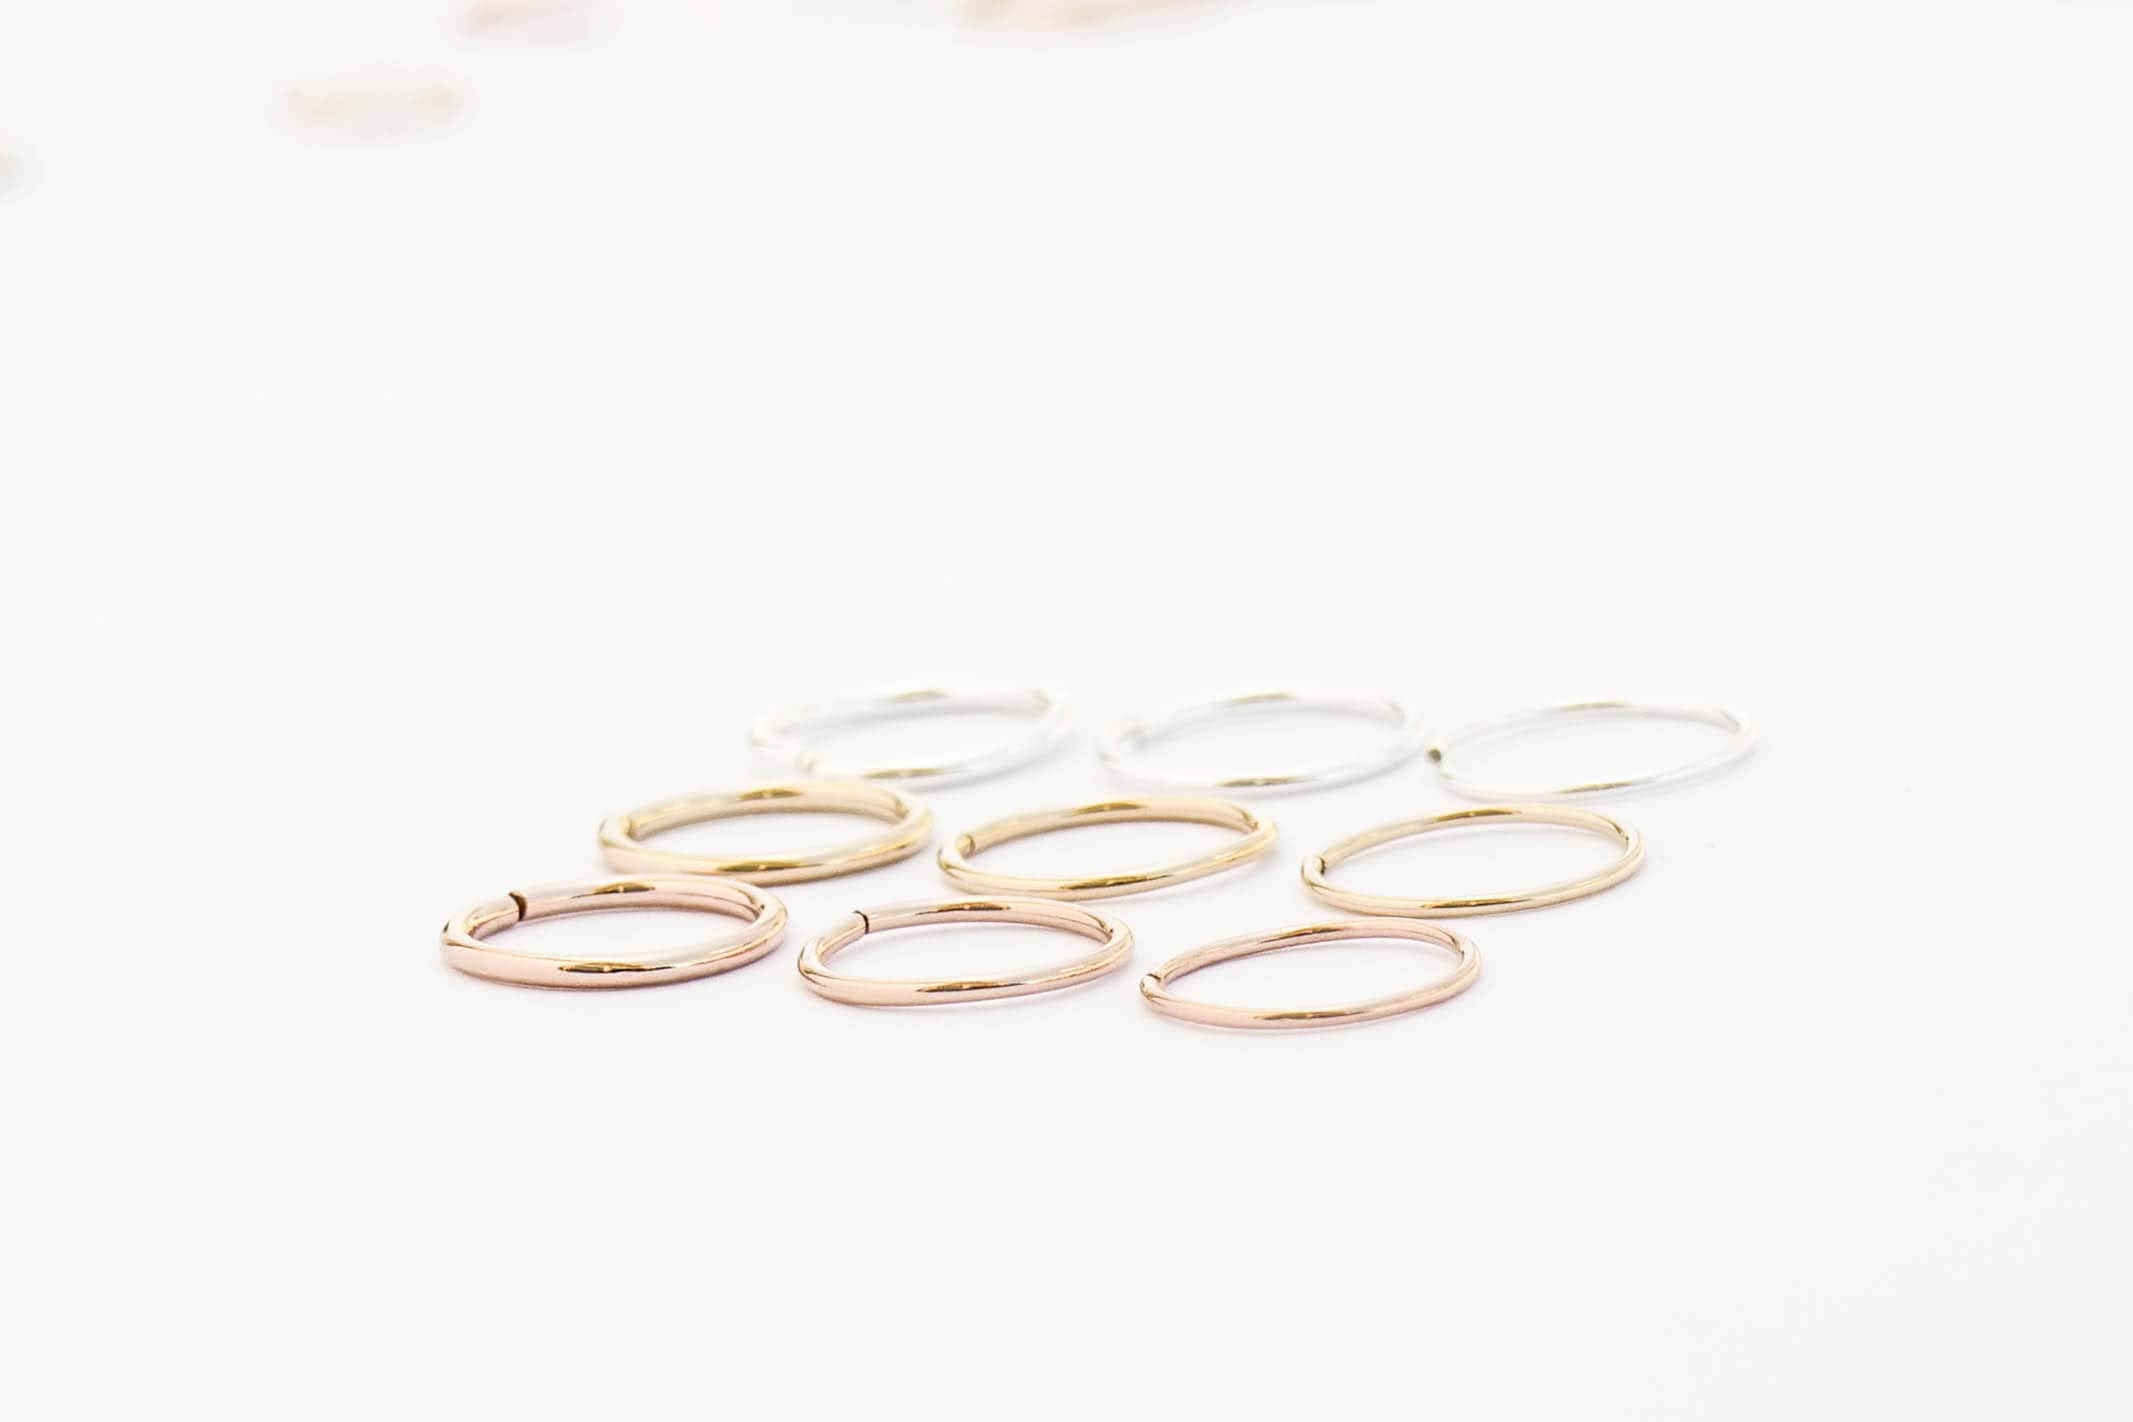 Snug Fitting Nose Ring Hoop Tight g Nose Ring Hoop Gold Etsy